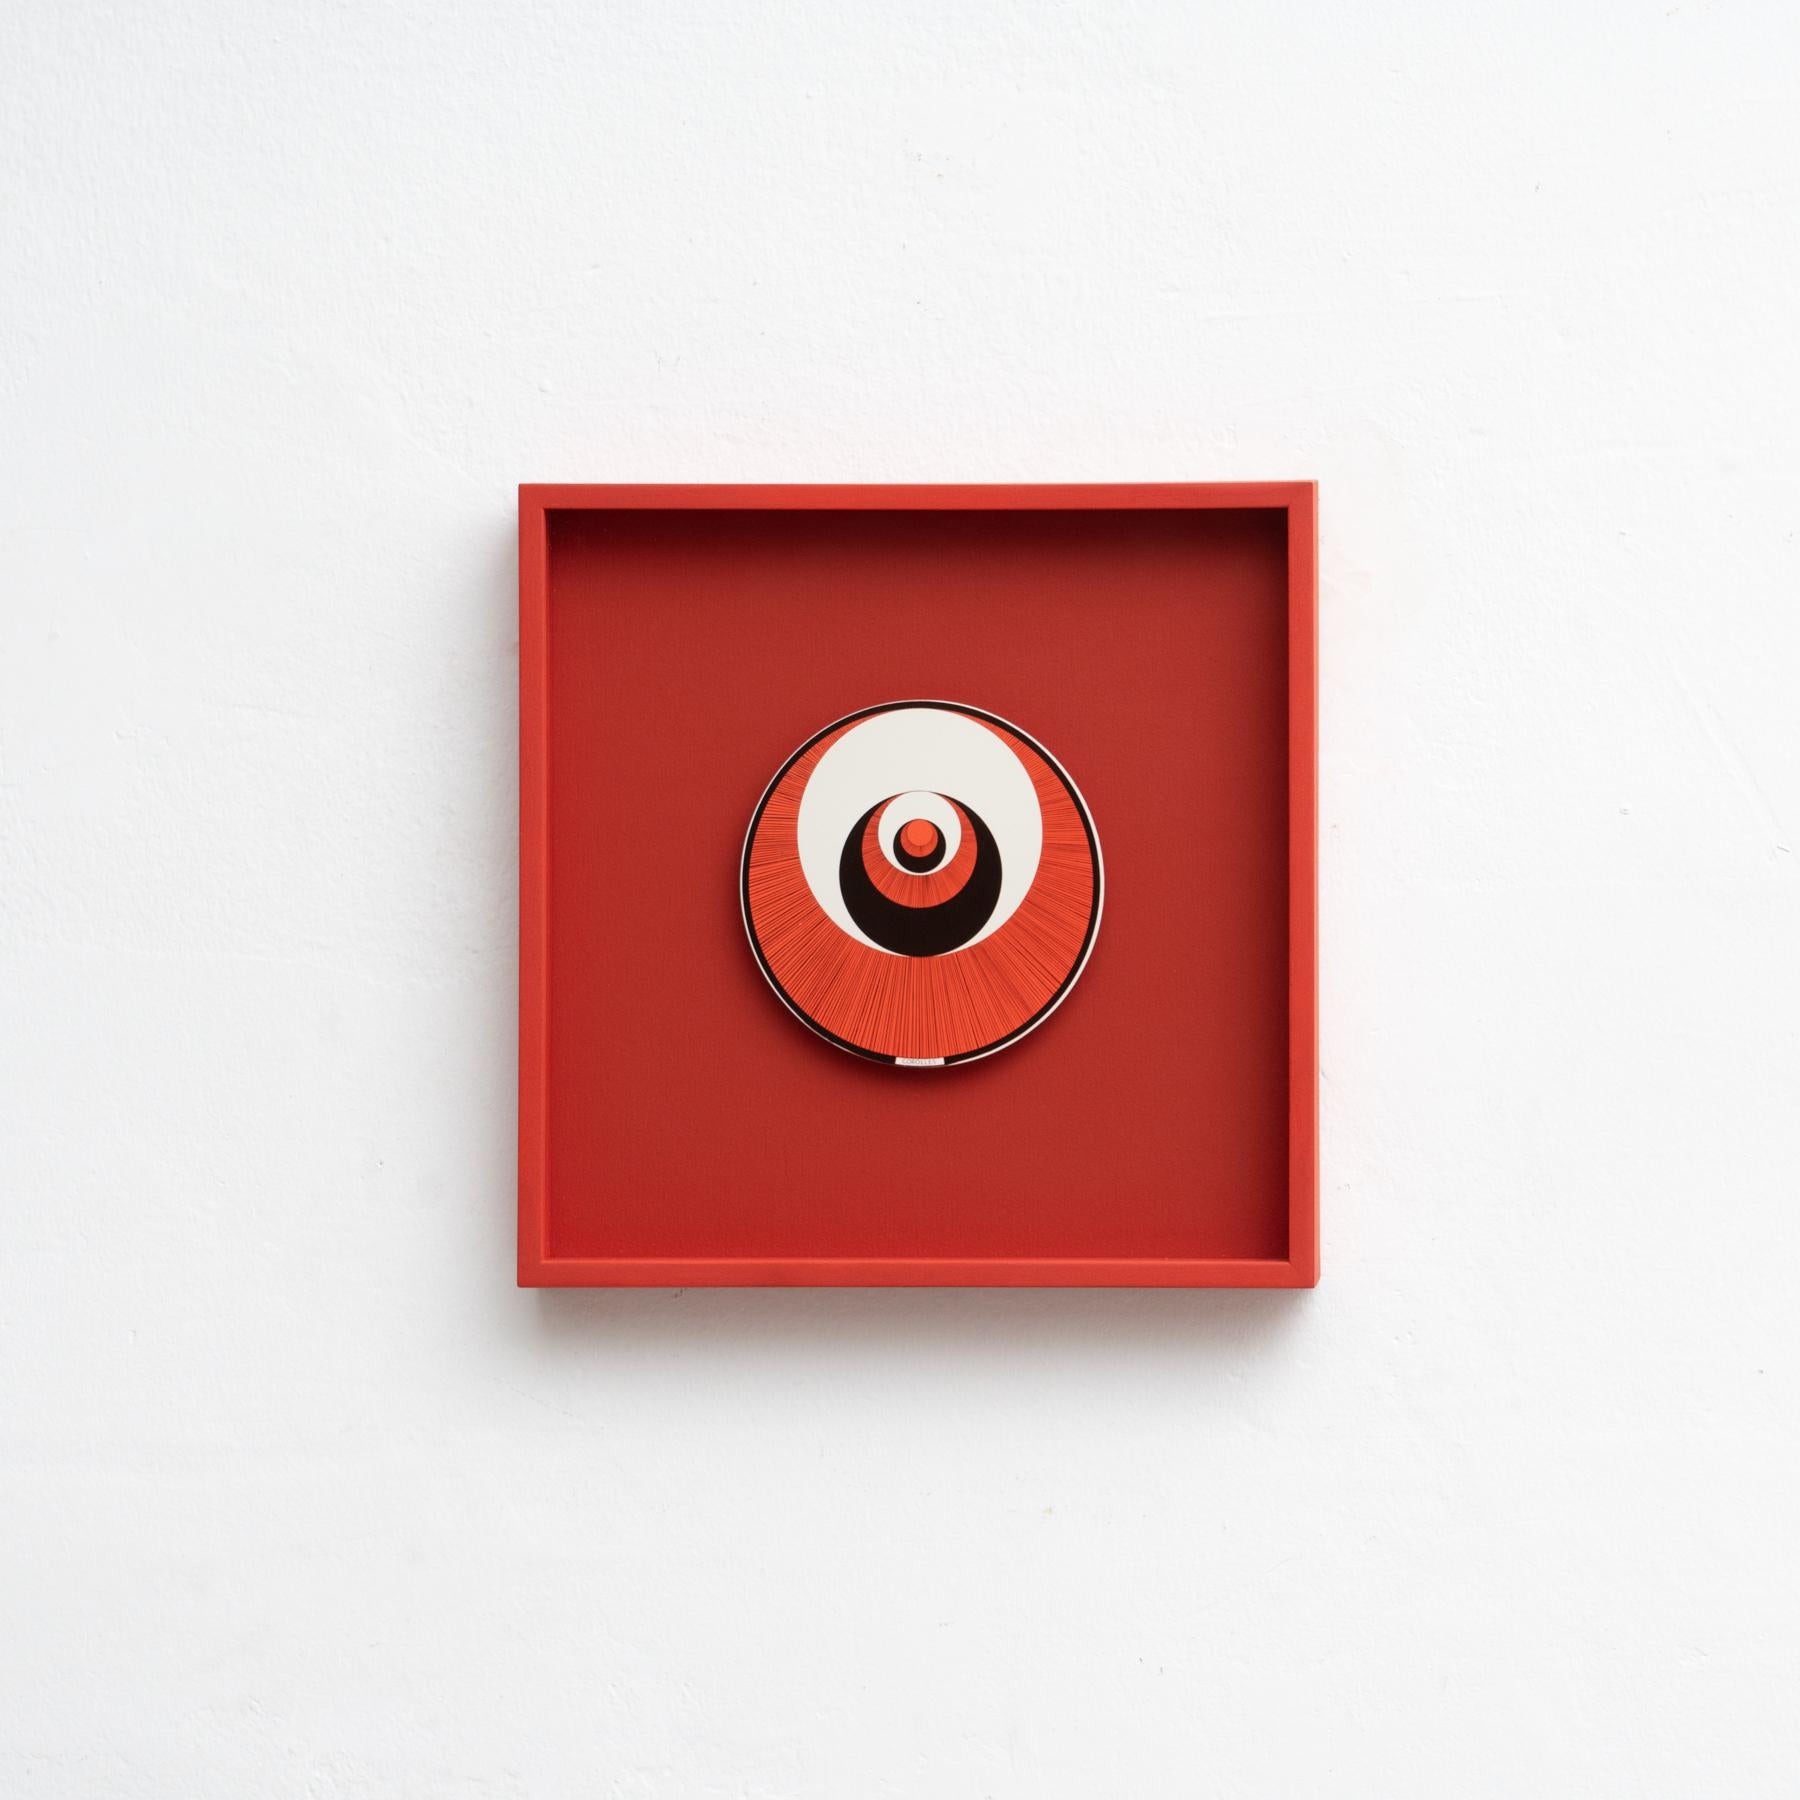 French Set of 6 Marcel Duchamp Rotoreliefs Red Frmaed by Konig Series 133, 1987 For Sale